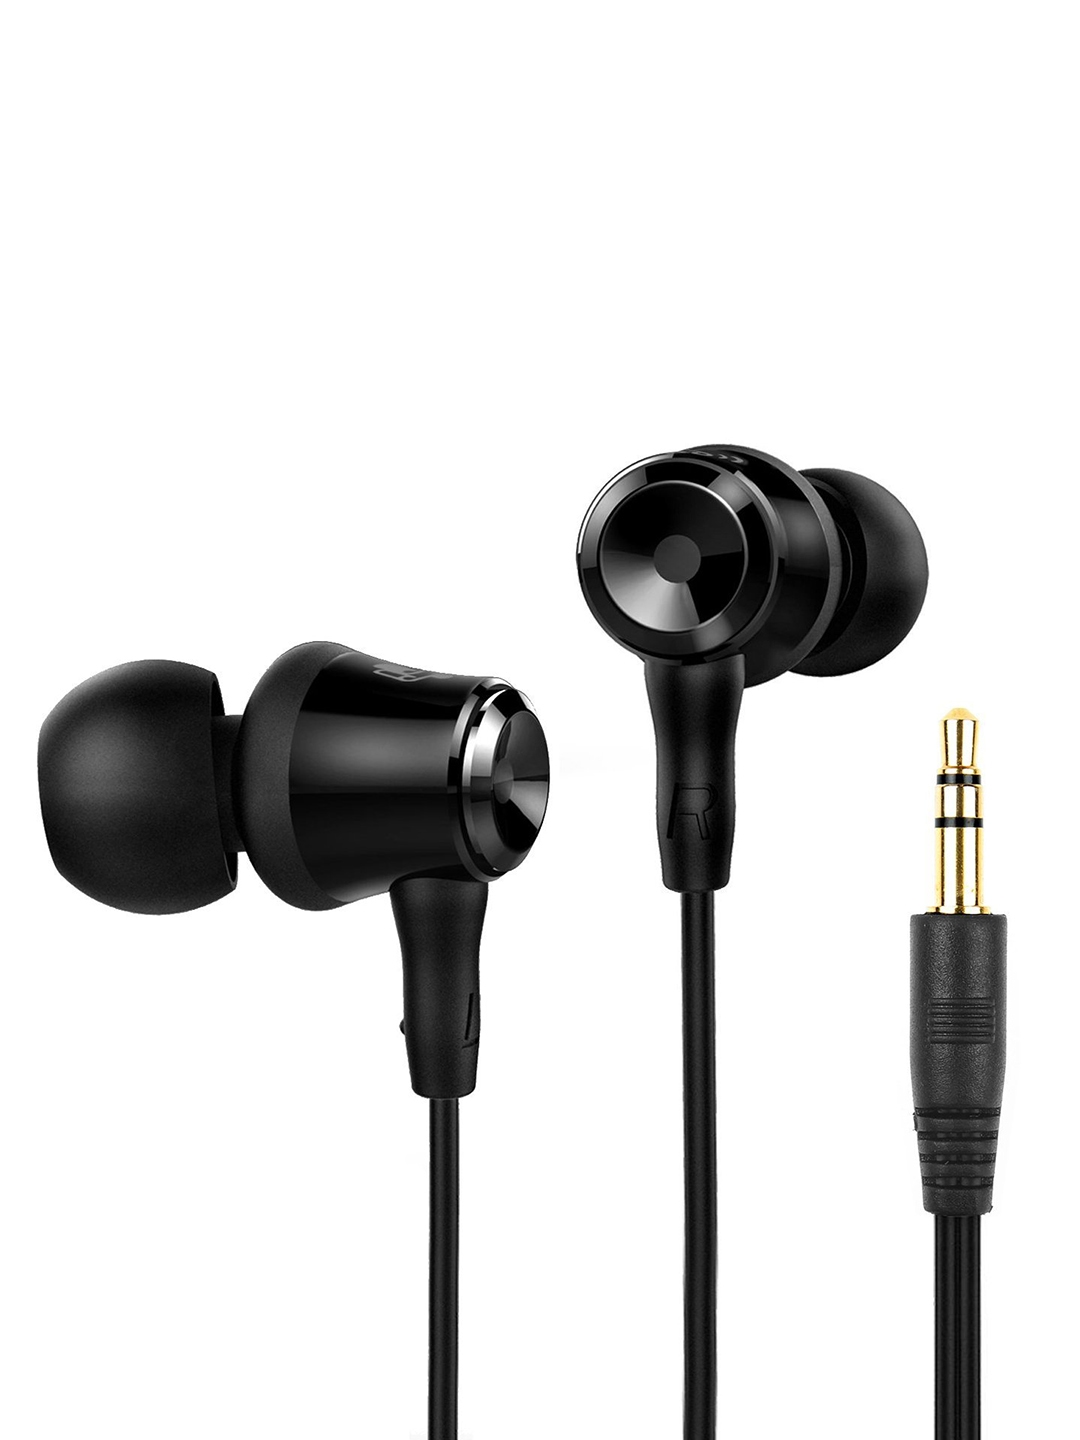 For 476/-(60% Off) SoundPEATS Black B10 In-Ear Wired Headphones at Myntra